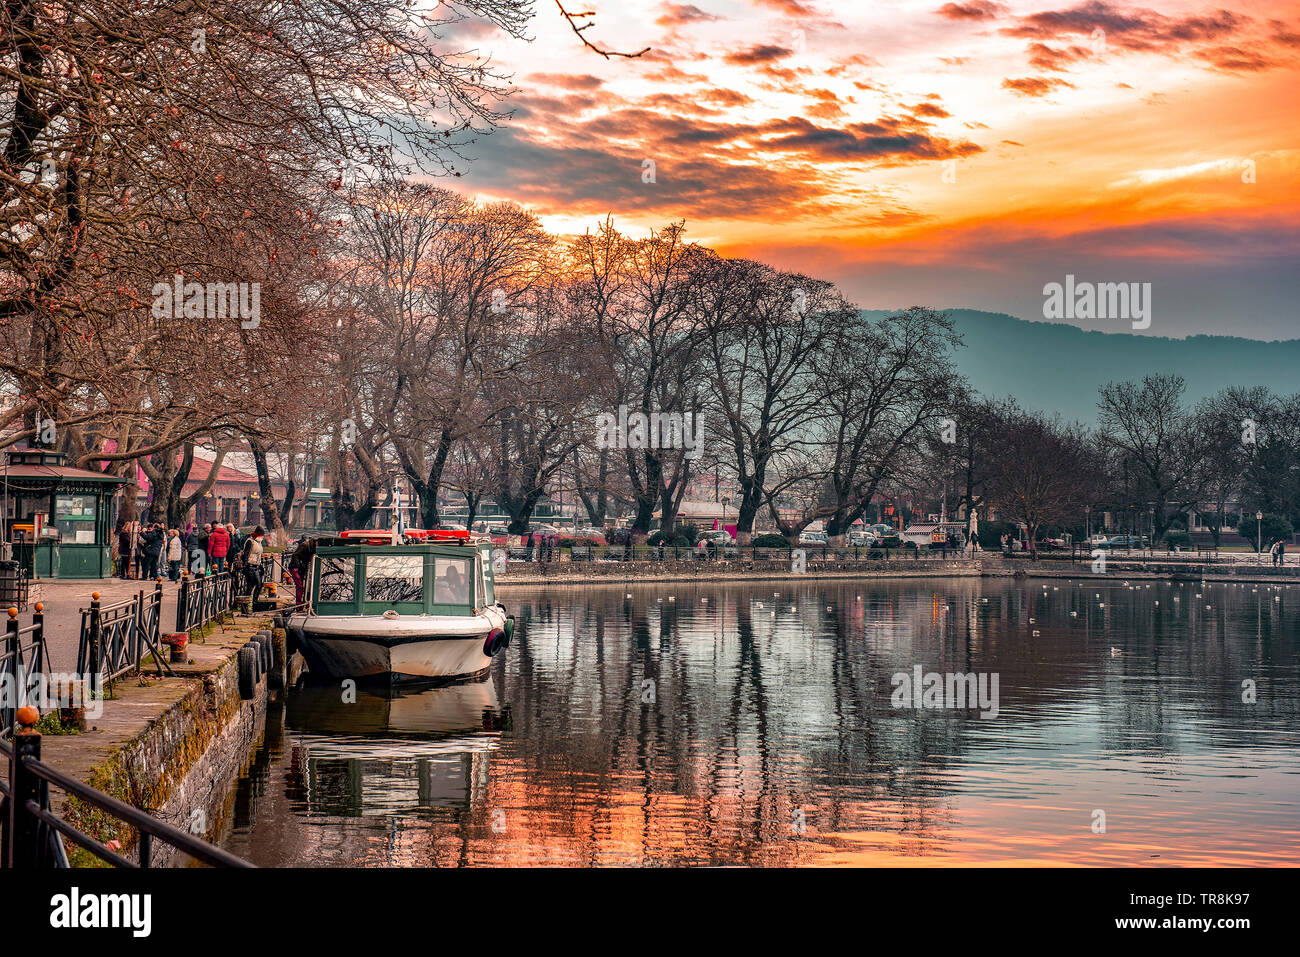 Sunset on lake Pamvotis. Docked boat ready to transfer people to the small island. Greece. Stock Photo